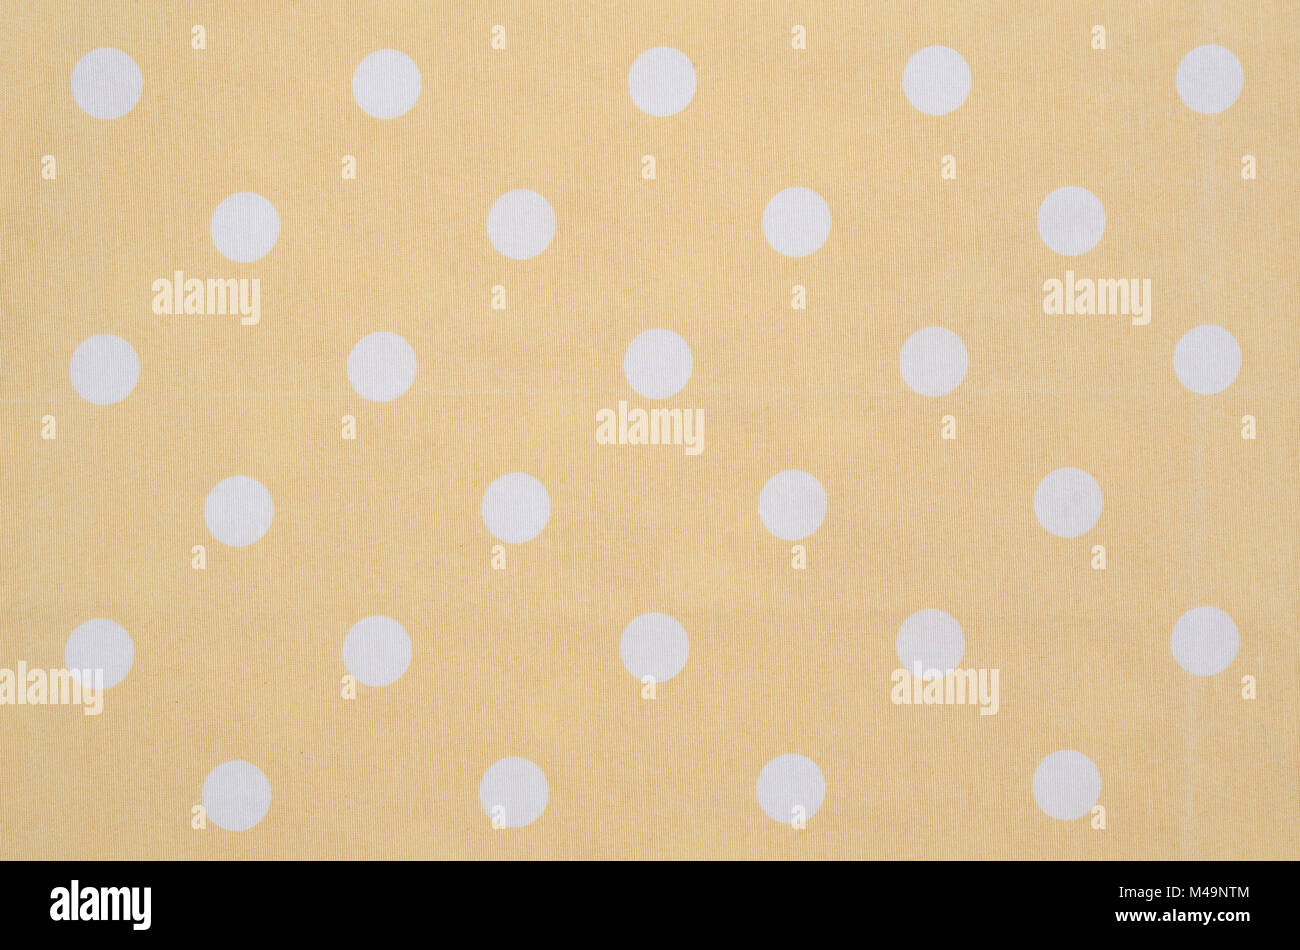 Kitchen yellow table cloth texture fabric with white dots Stock Photo